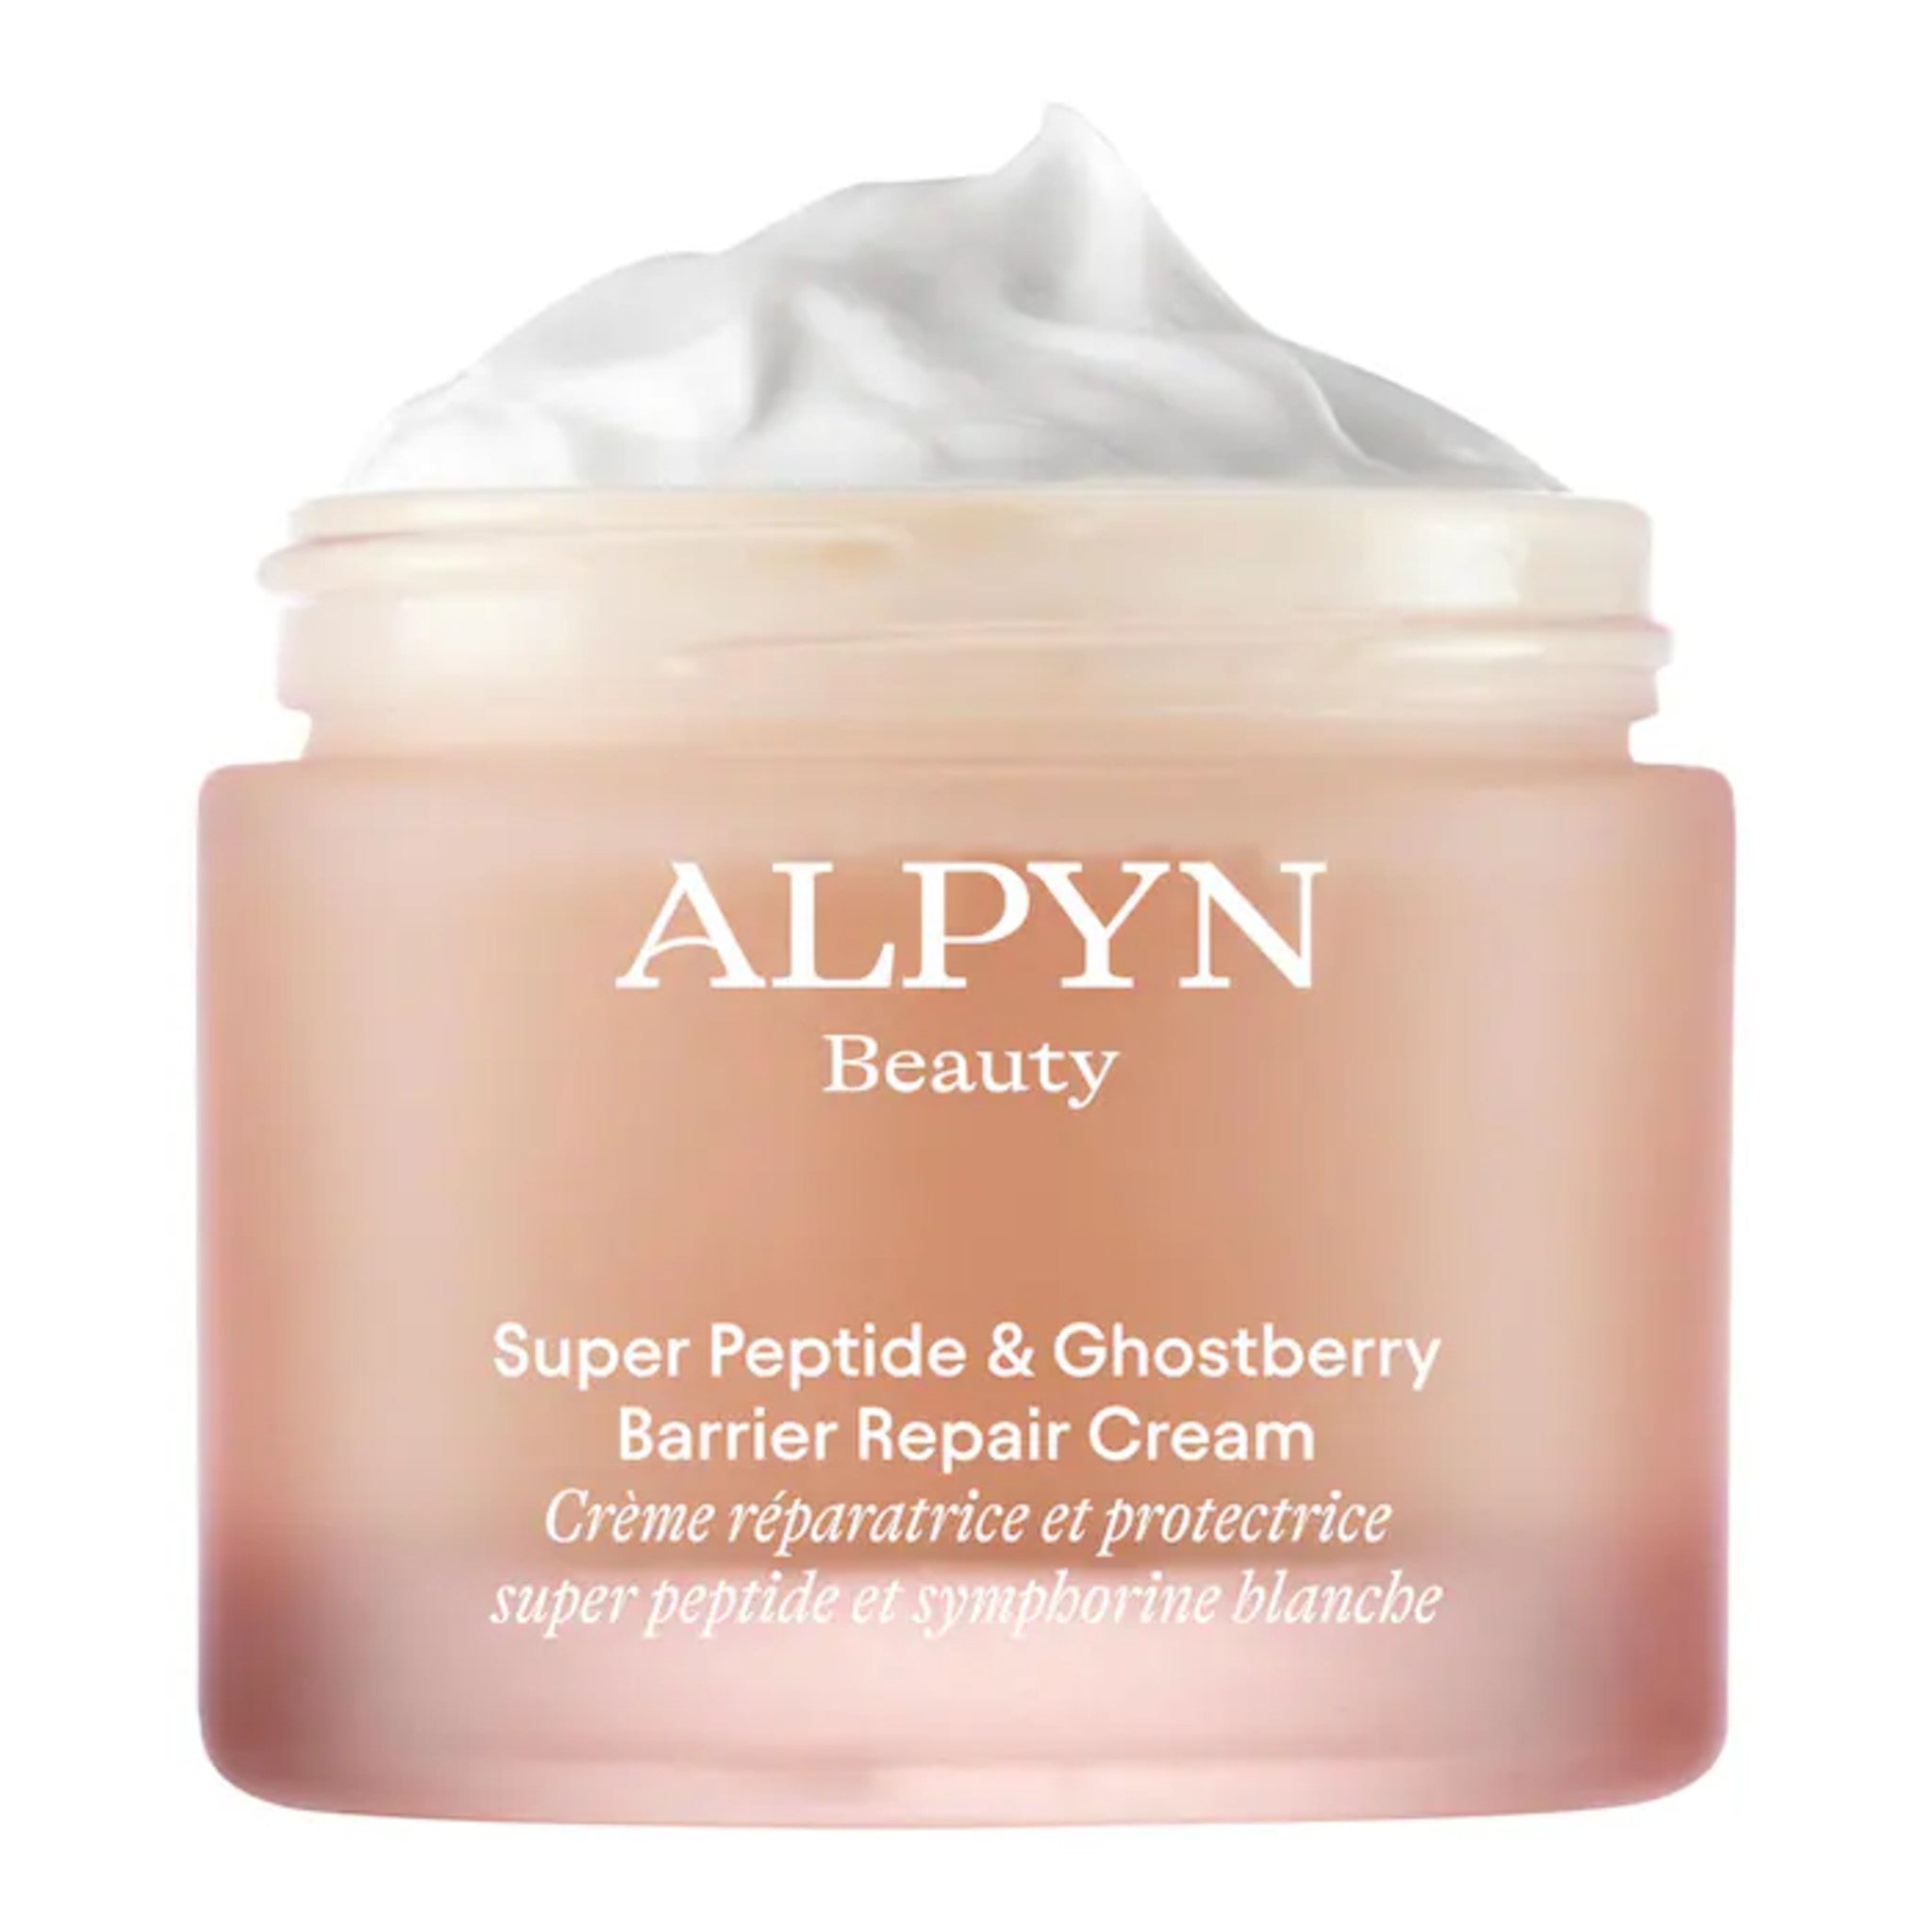 Alpyn Beauty Super Peptide and Ghostberry Barrier Repair Cream main image.